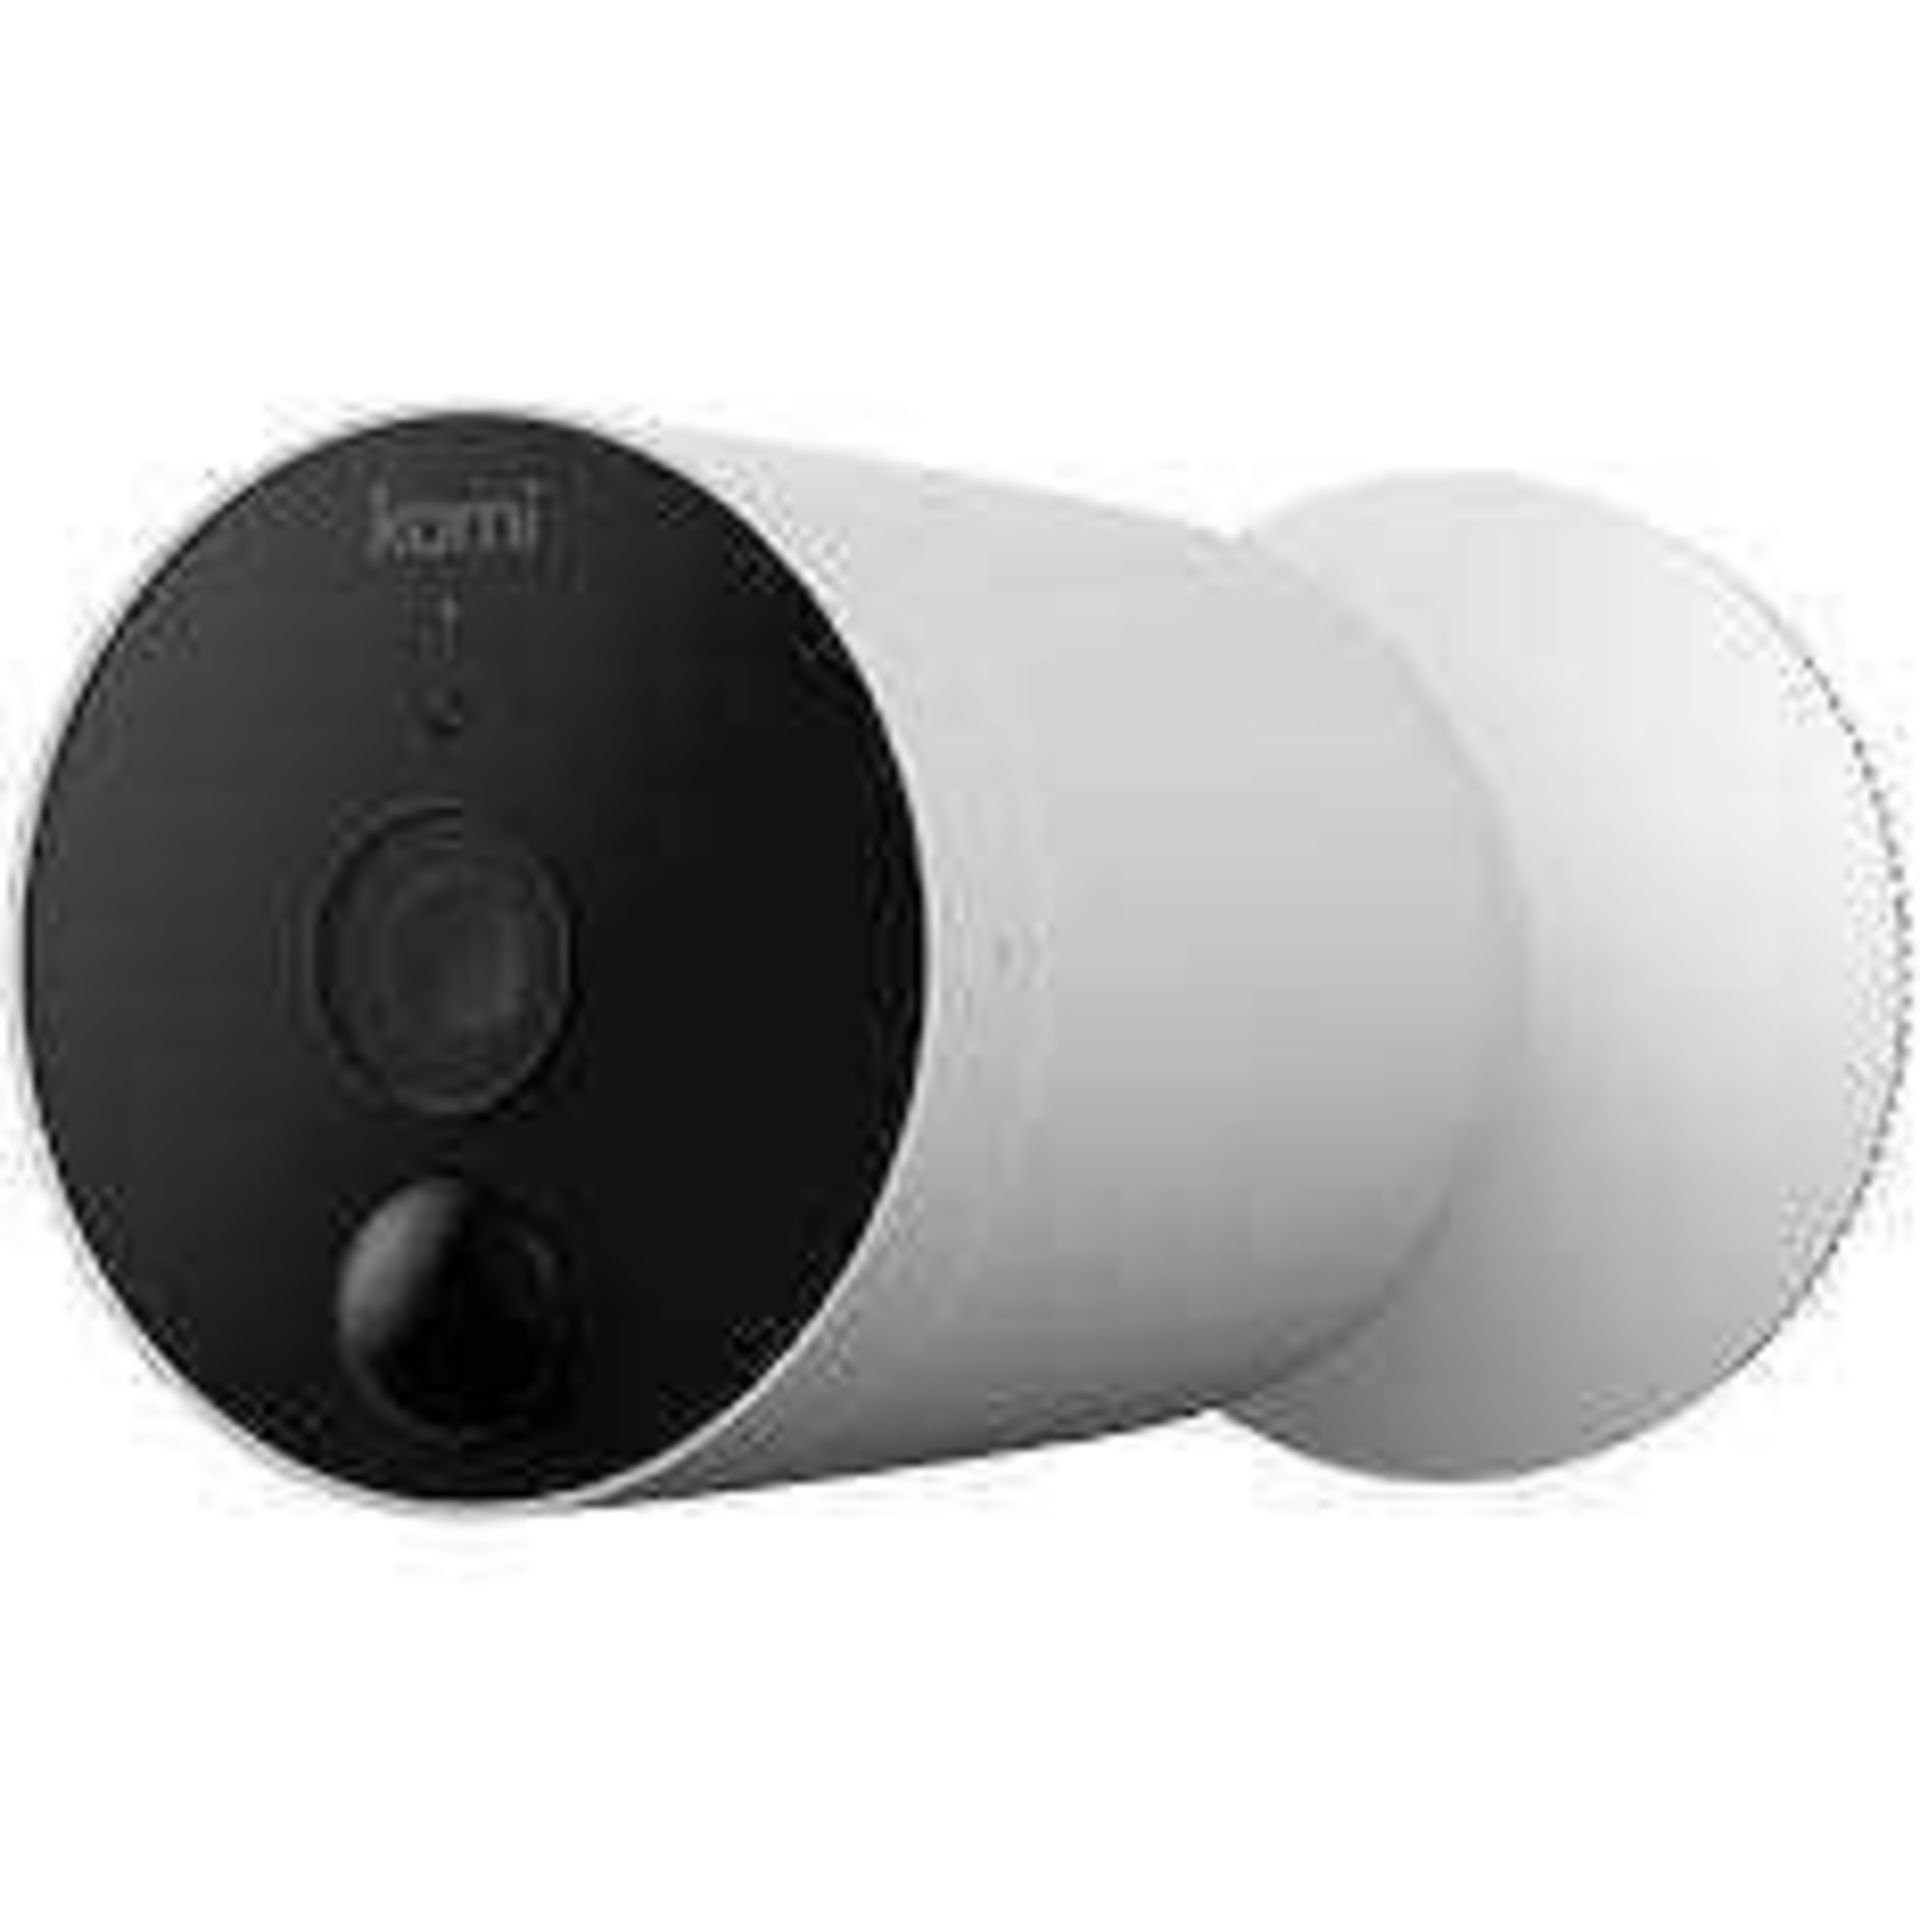 RRP £100. Boxed Kami Wire-Free Outdoor Camera 1080P Video Ip65